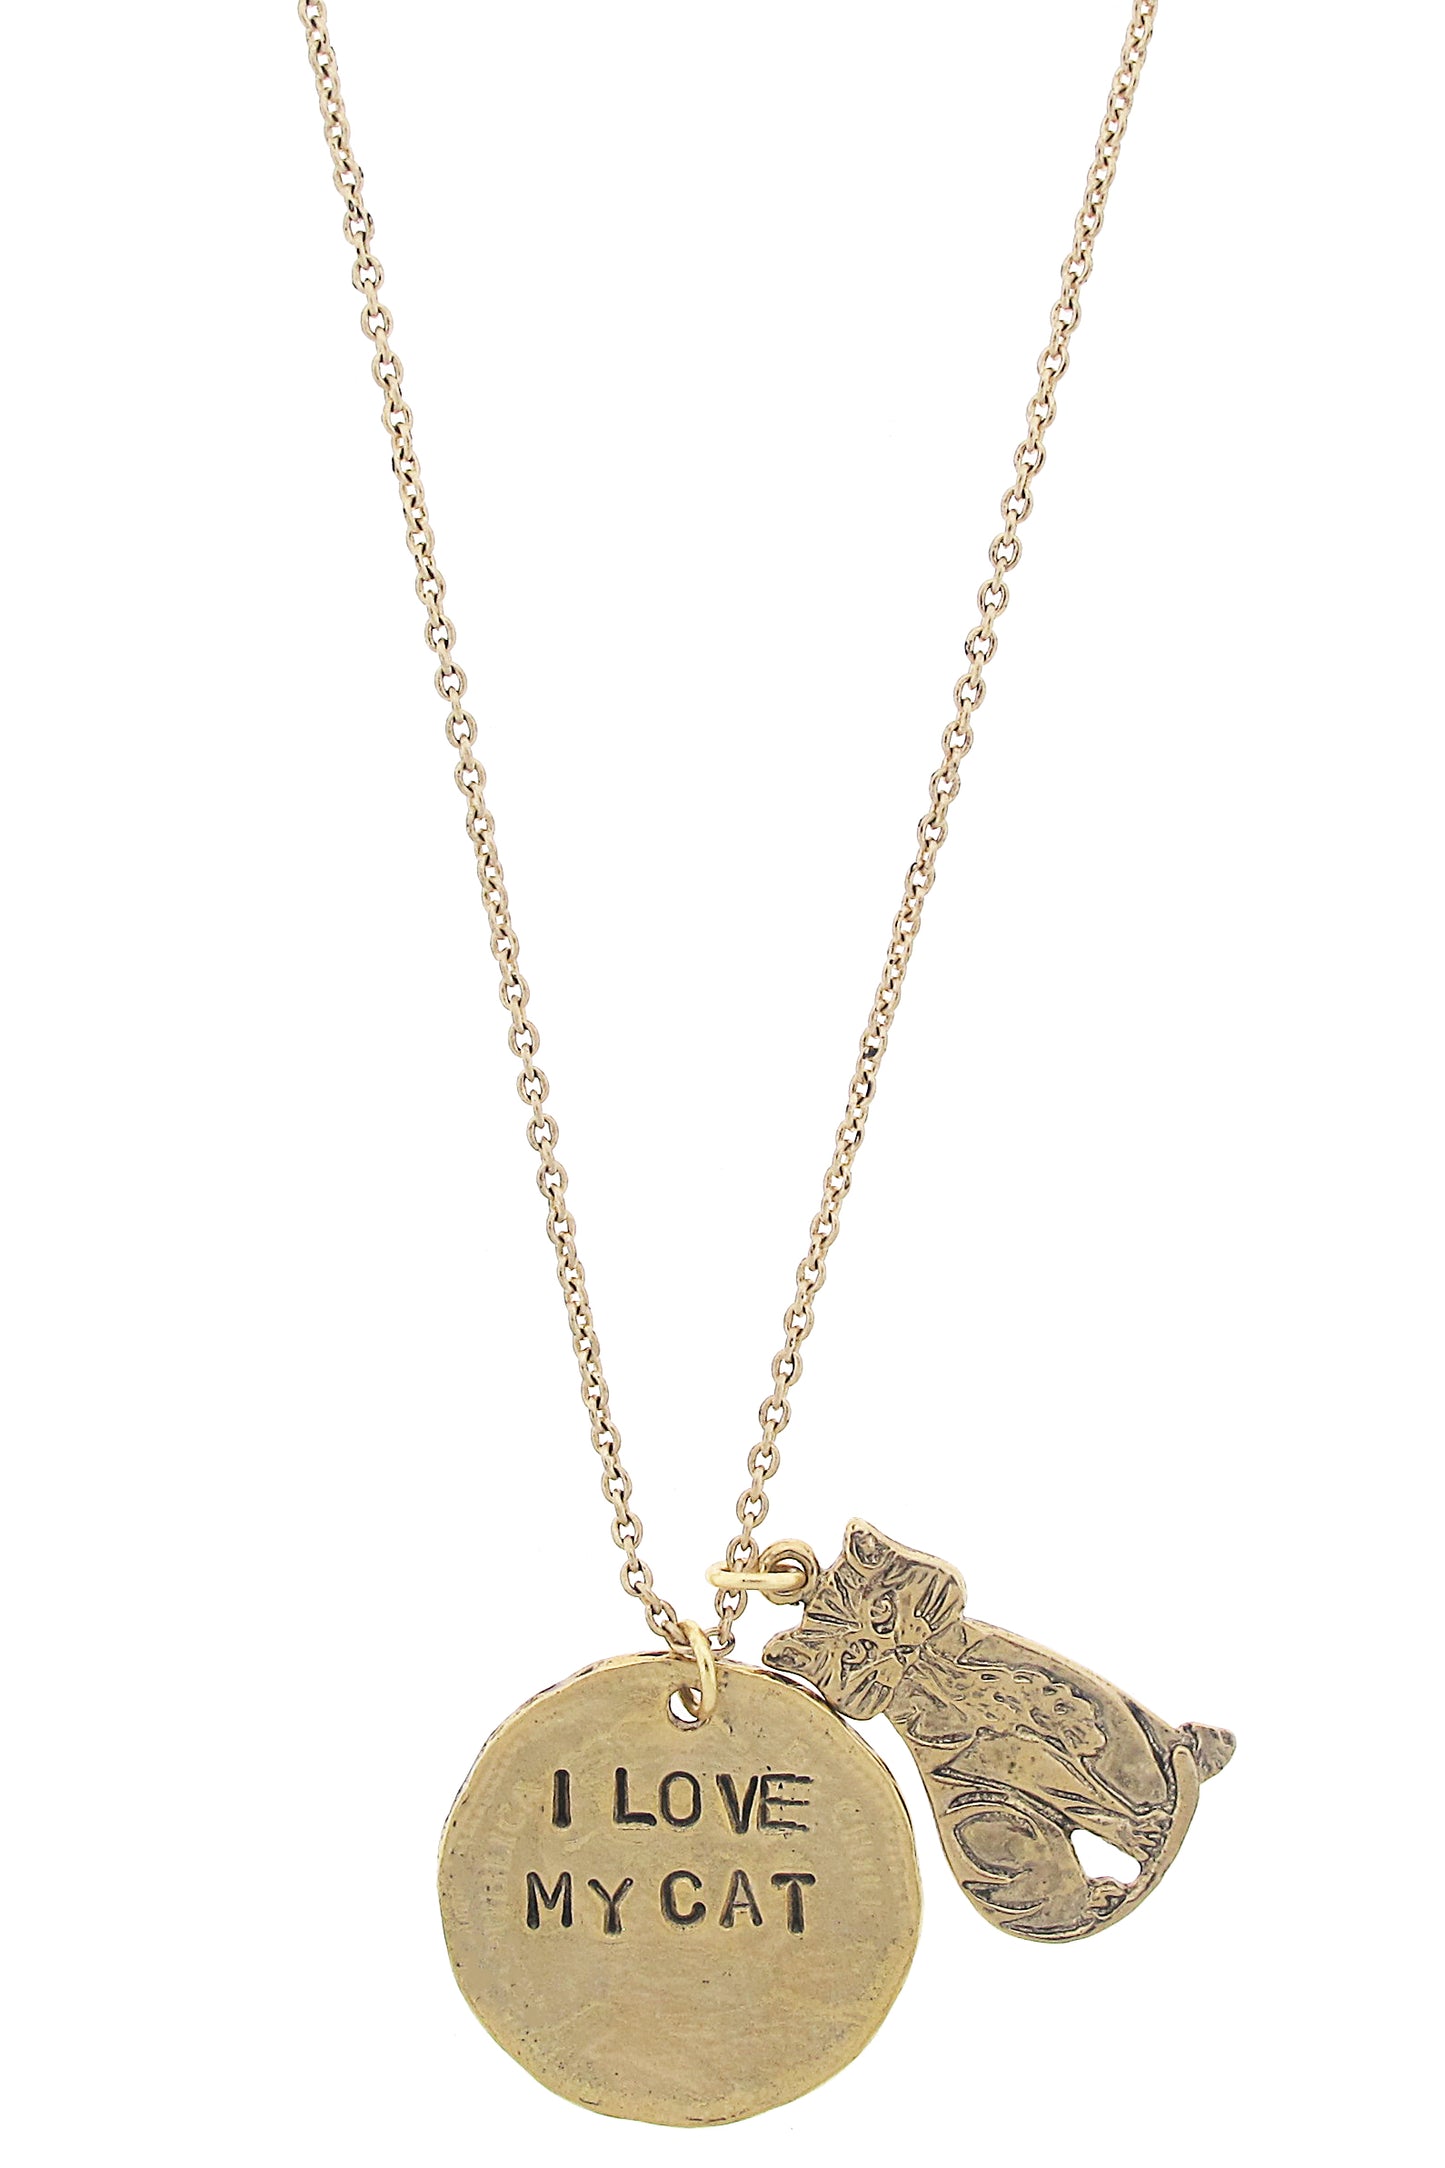 I Love My Cat Hand Stamped Necklace